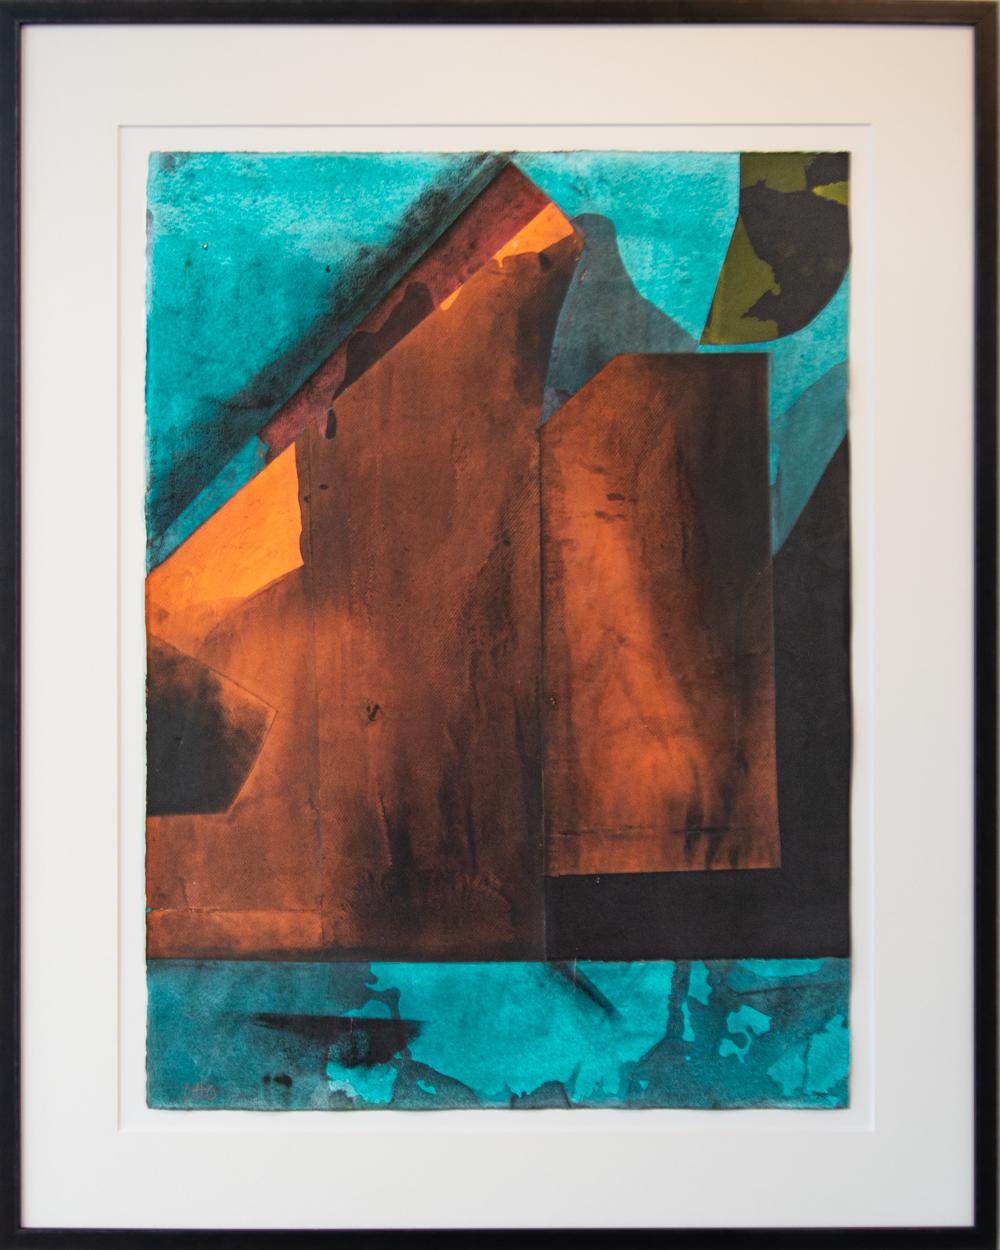 Untitled (Work on Paper) - vibrant, modernist abstract, mixed media on paper - Mixed Media Art by Otto Rogers